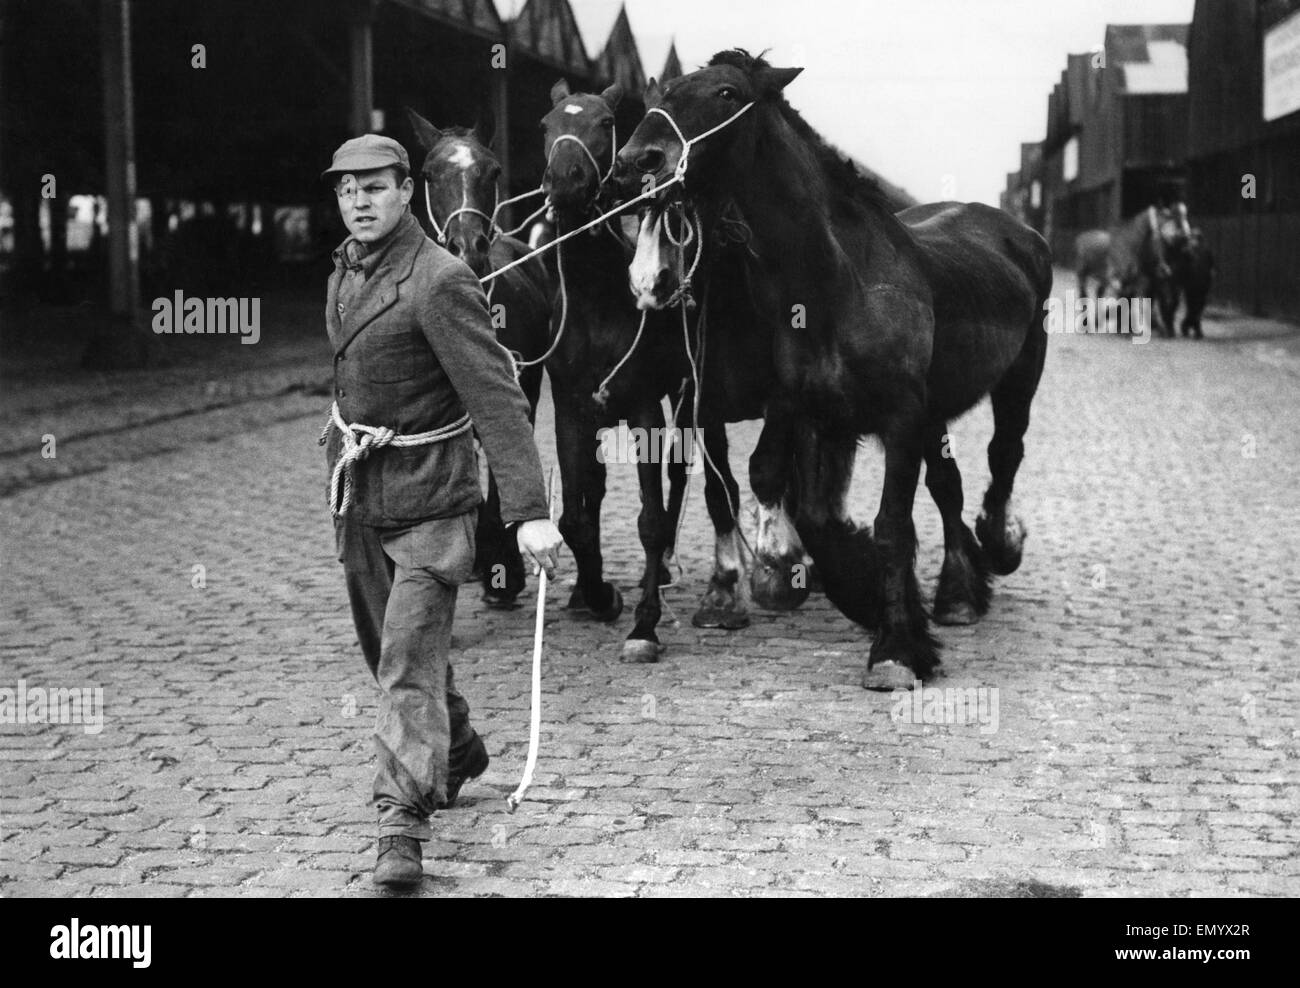 In Antwerp, a horse is now three times more valuable dead than alive - and a handful of Belgium butchers are making £1,000,000 a year by the mass slaughter of an animal which for centuries has been man's most faithful servant. The horses - shipped as work Stock Photo